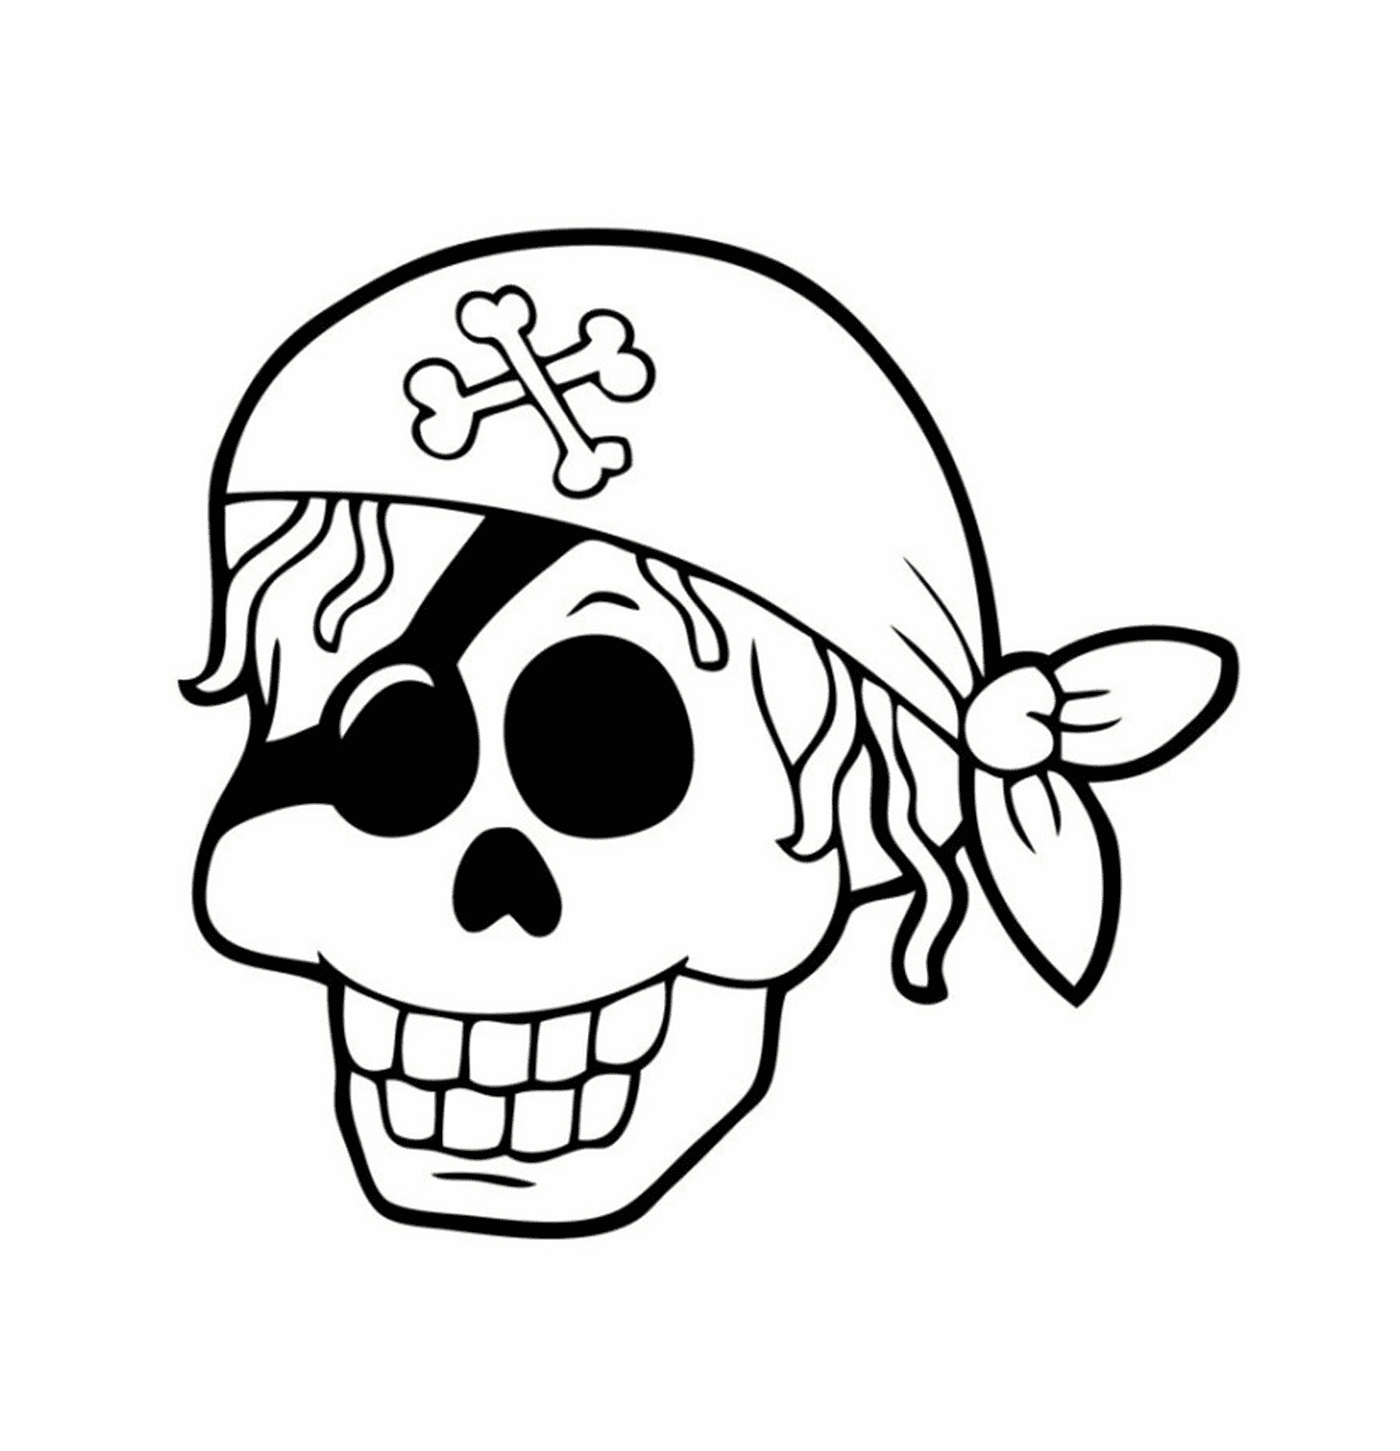  Scary pirate head of death 